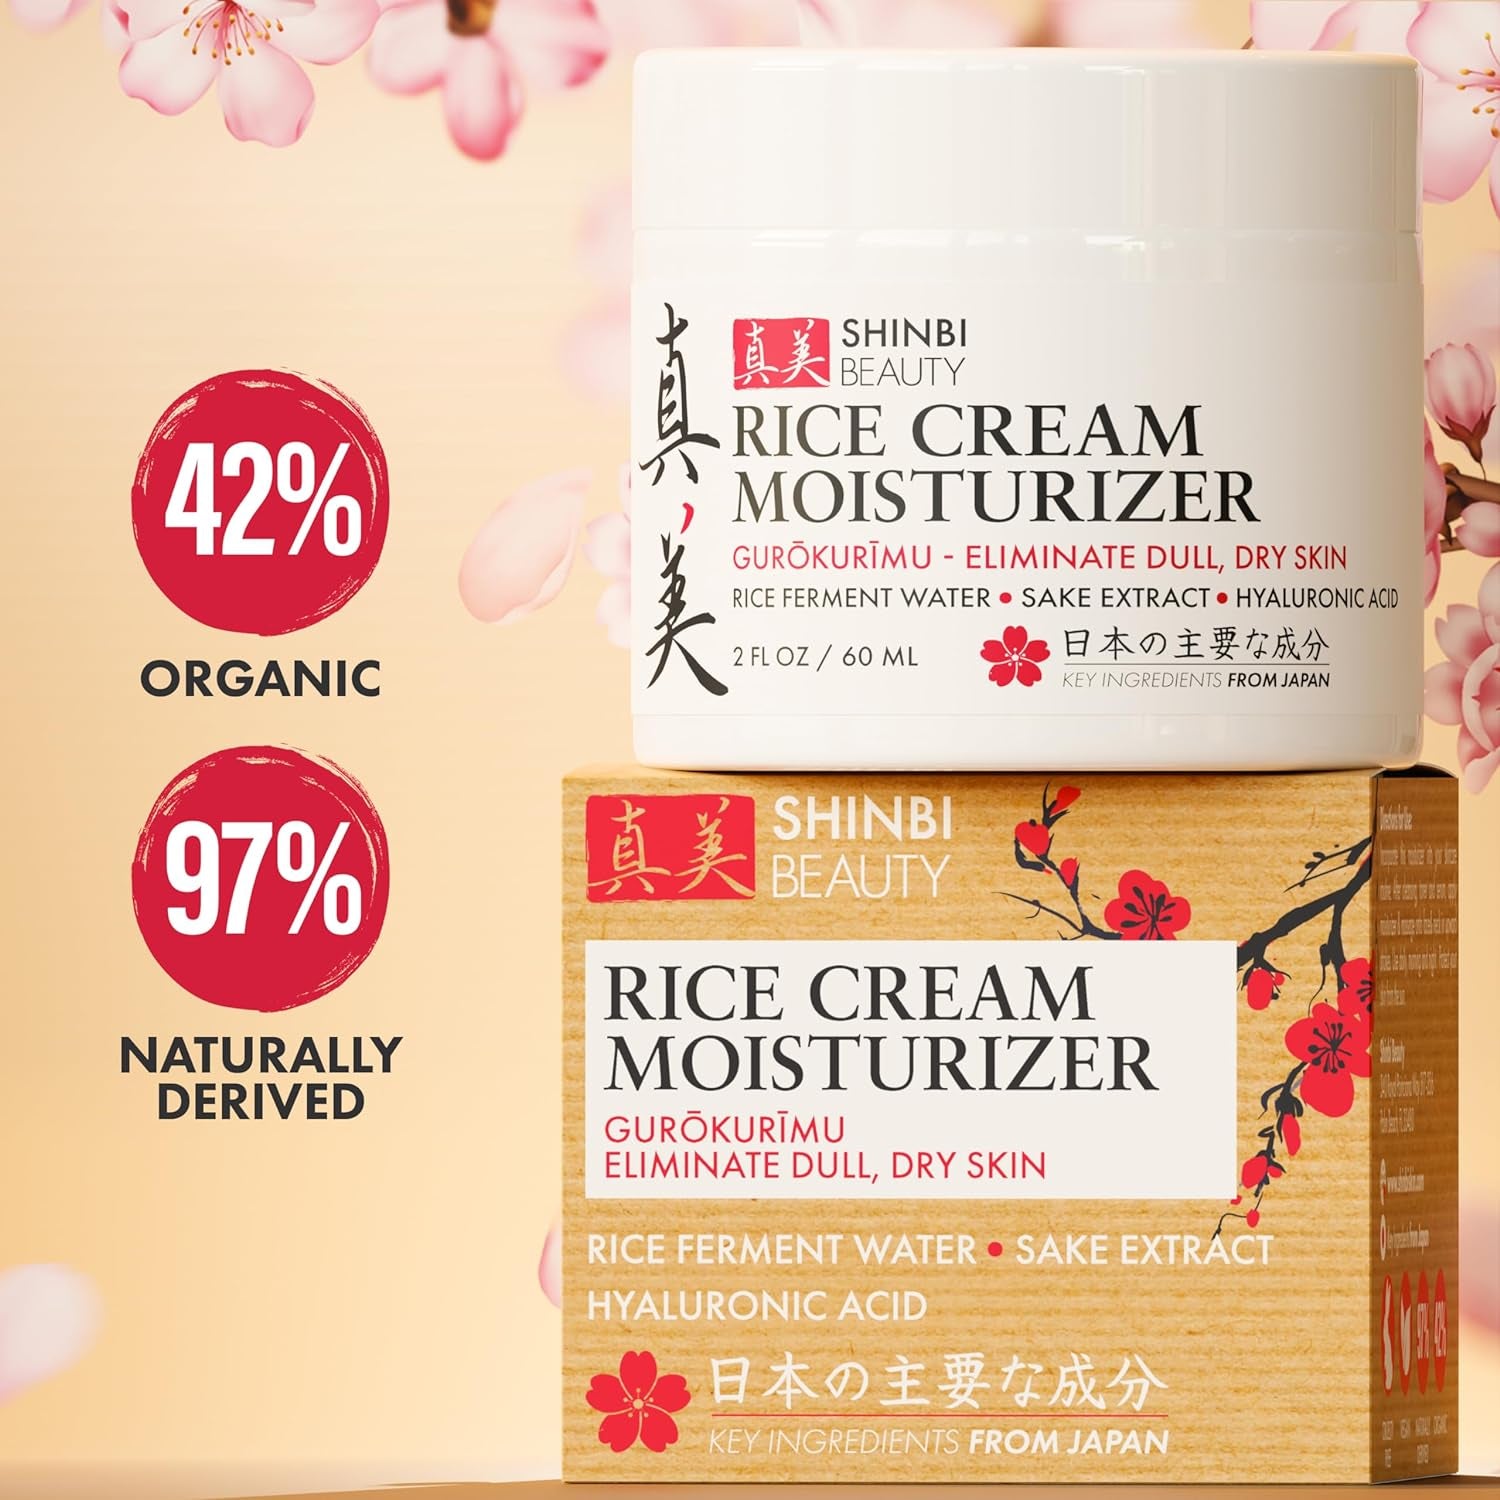 Shinbi Beauty Japanese Skincare Moisturizer for Face - Rice Cream with Rice Ferment + Sake Extract - J Beauty Natural Asian Skincare Products 2Oz